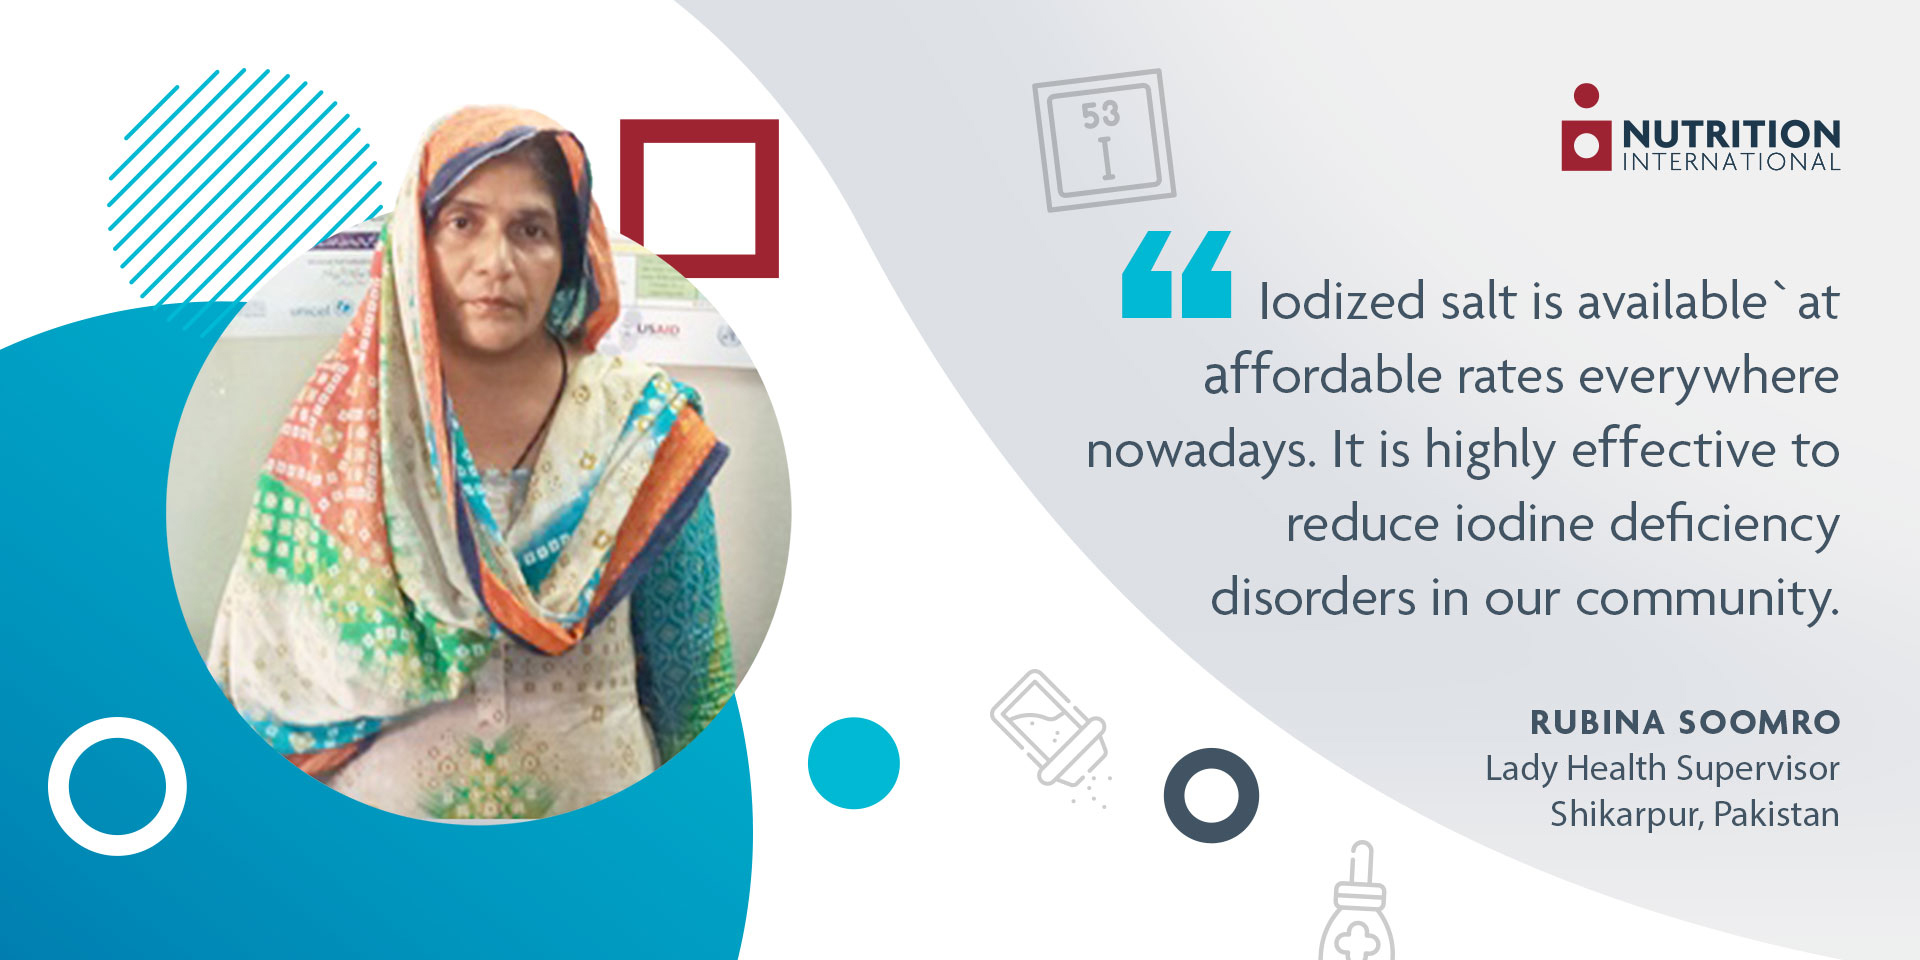 A lady health supervisor in Pakistan standing on the left side with a quote on the right saying: "“Iodized salt is available at affordable rates everywhere nowadays. This is highly effective to reduce IDDs in our community.” 